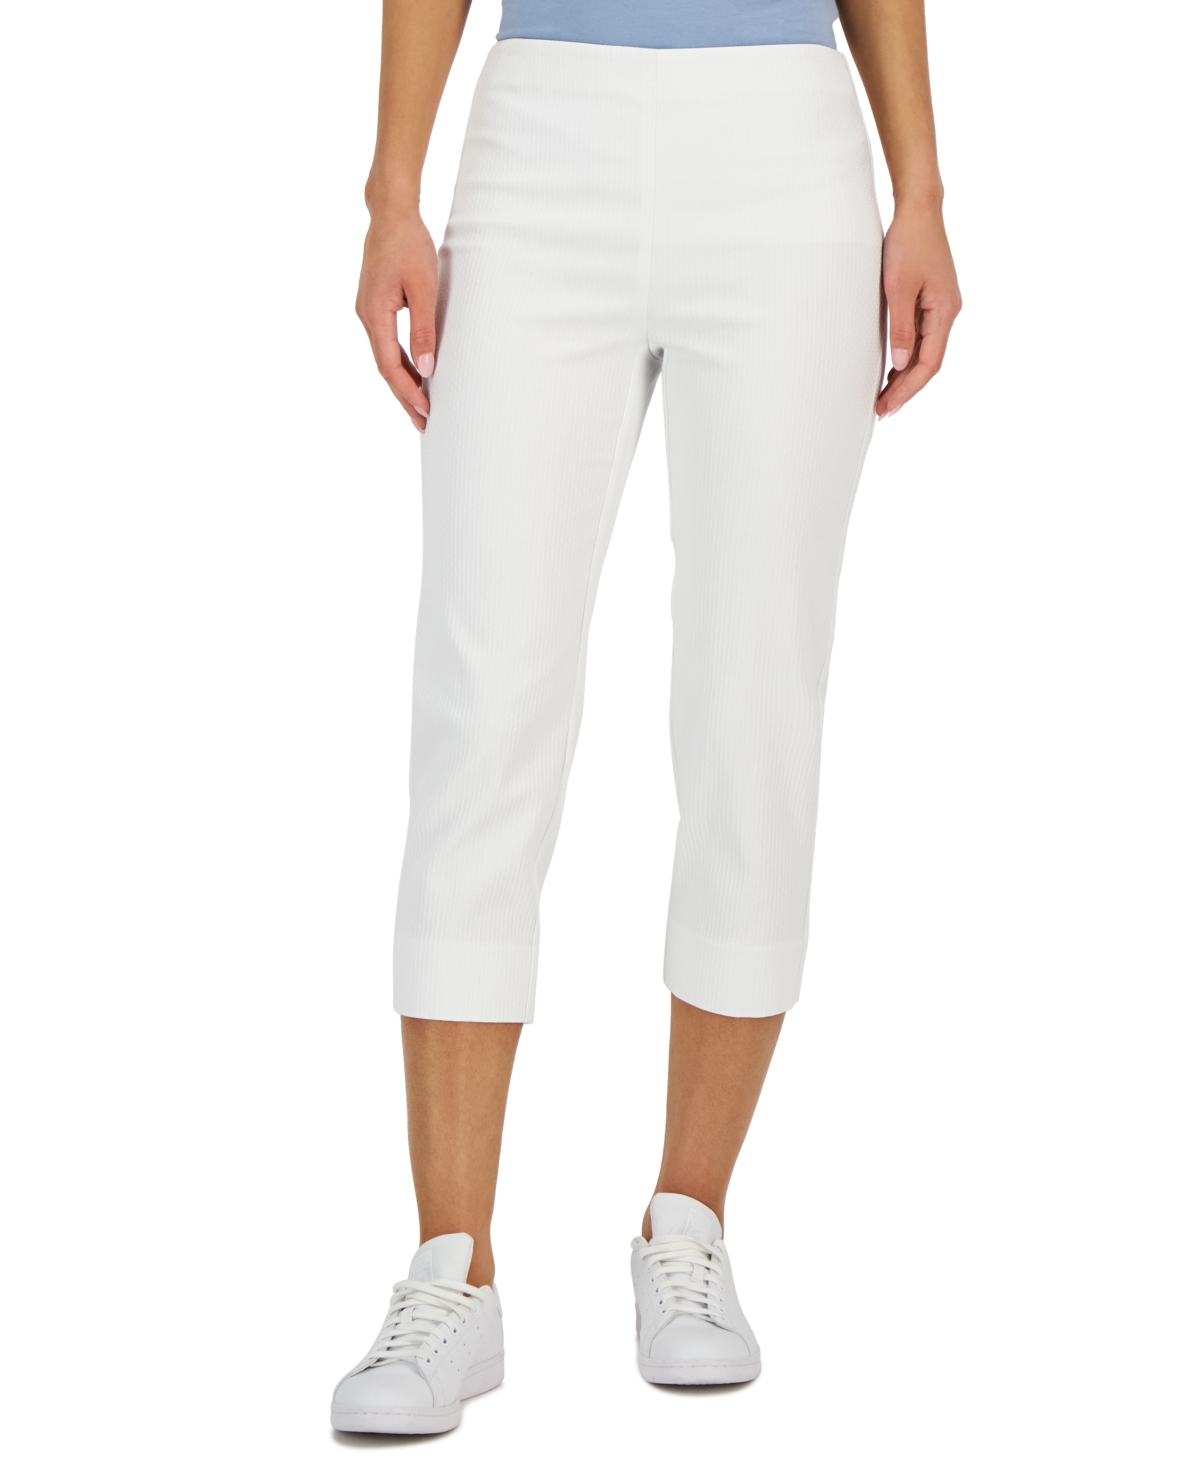 CHARTER CLUB WOMEN'S JACQUARD PULL-ON CAPRIS PANTS, CREATED FOR MACY'S